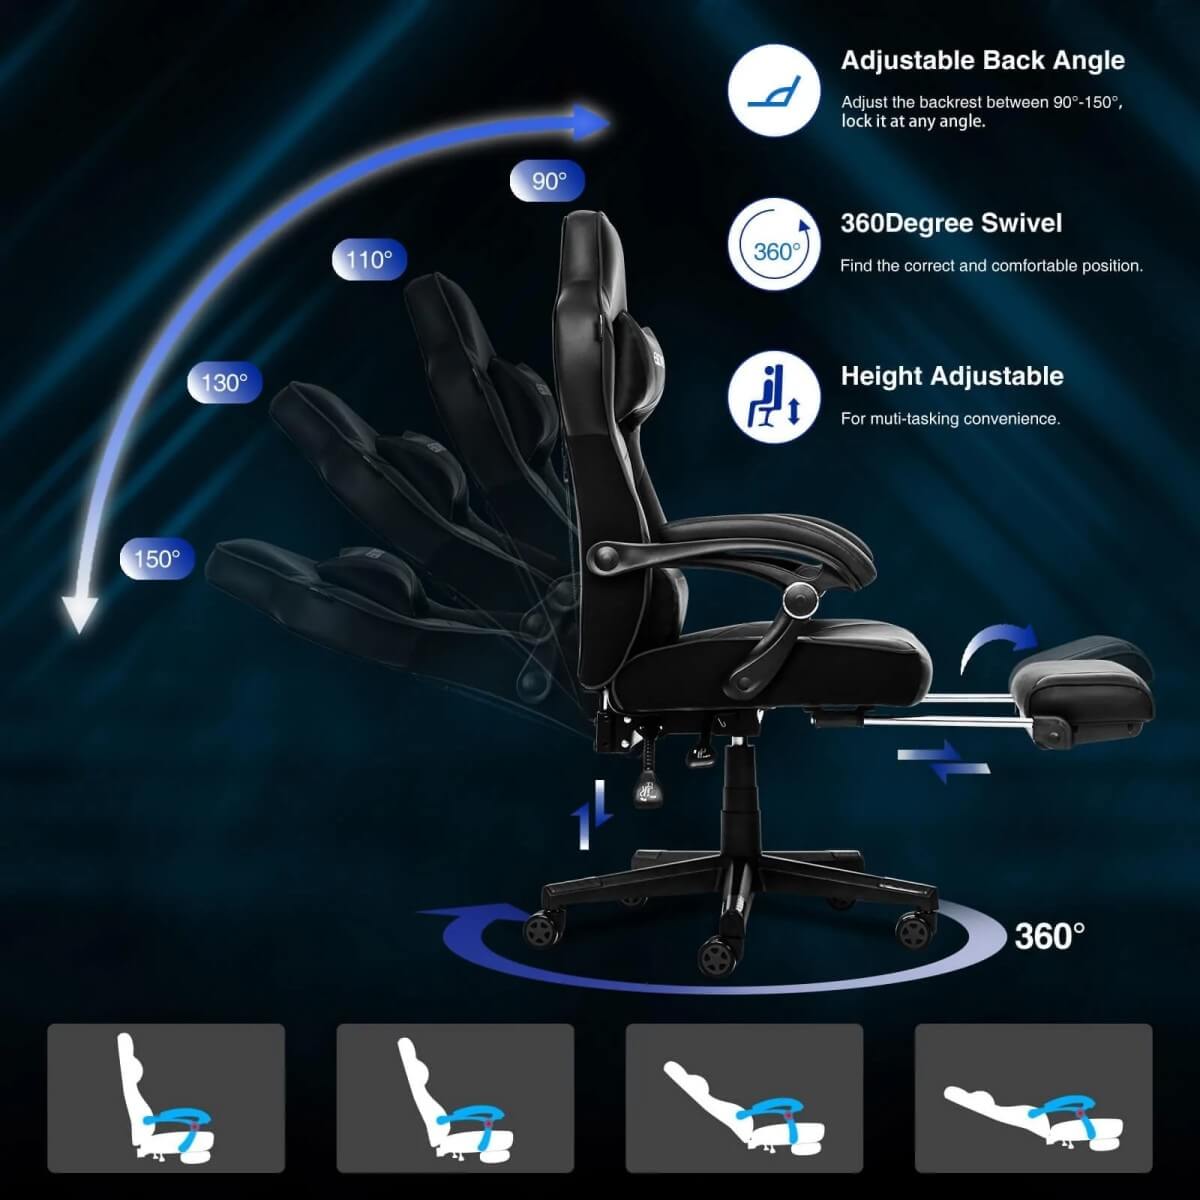 Elecwish Video Game Chairs White Gaming Chair With Footrest OC087 can adjustback angle, height and have 360 degree swivel